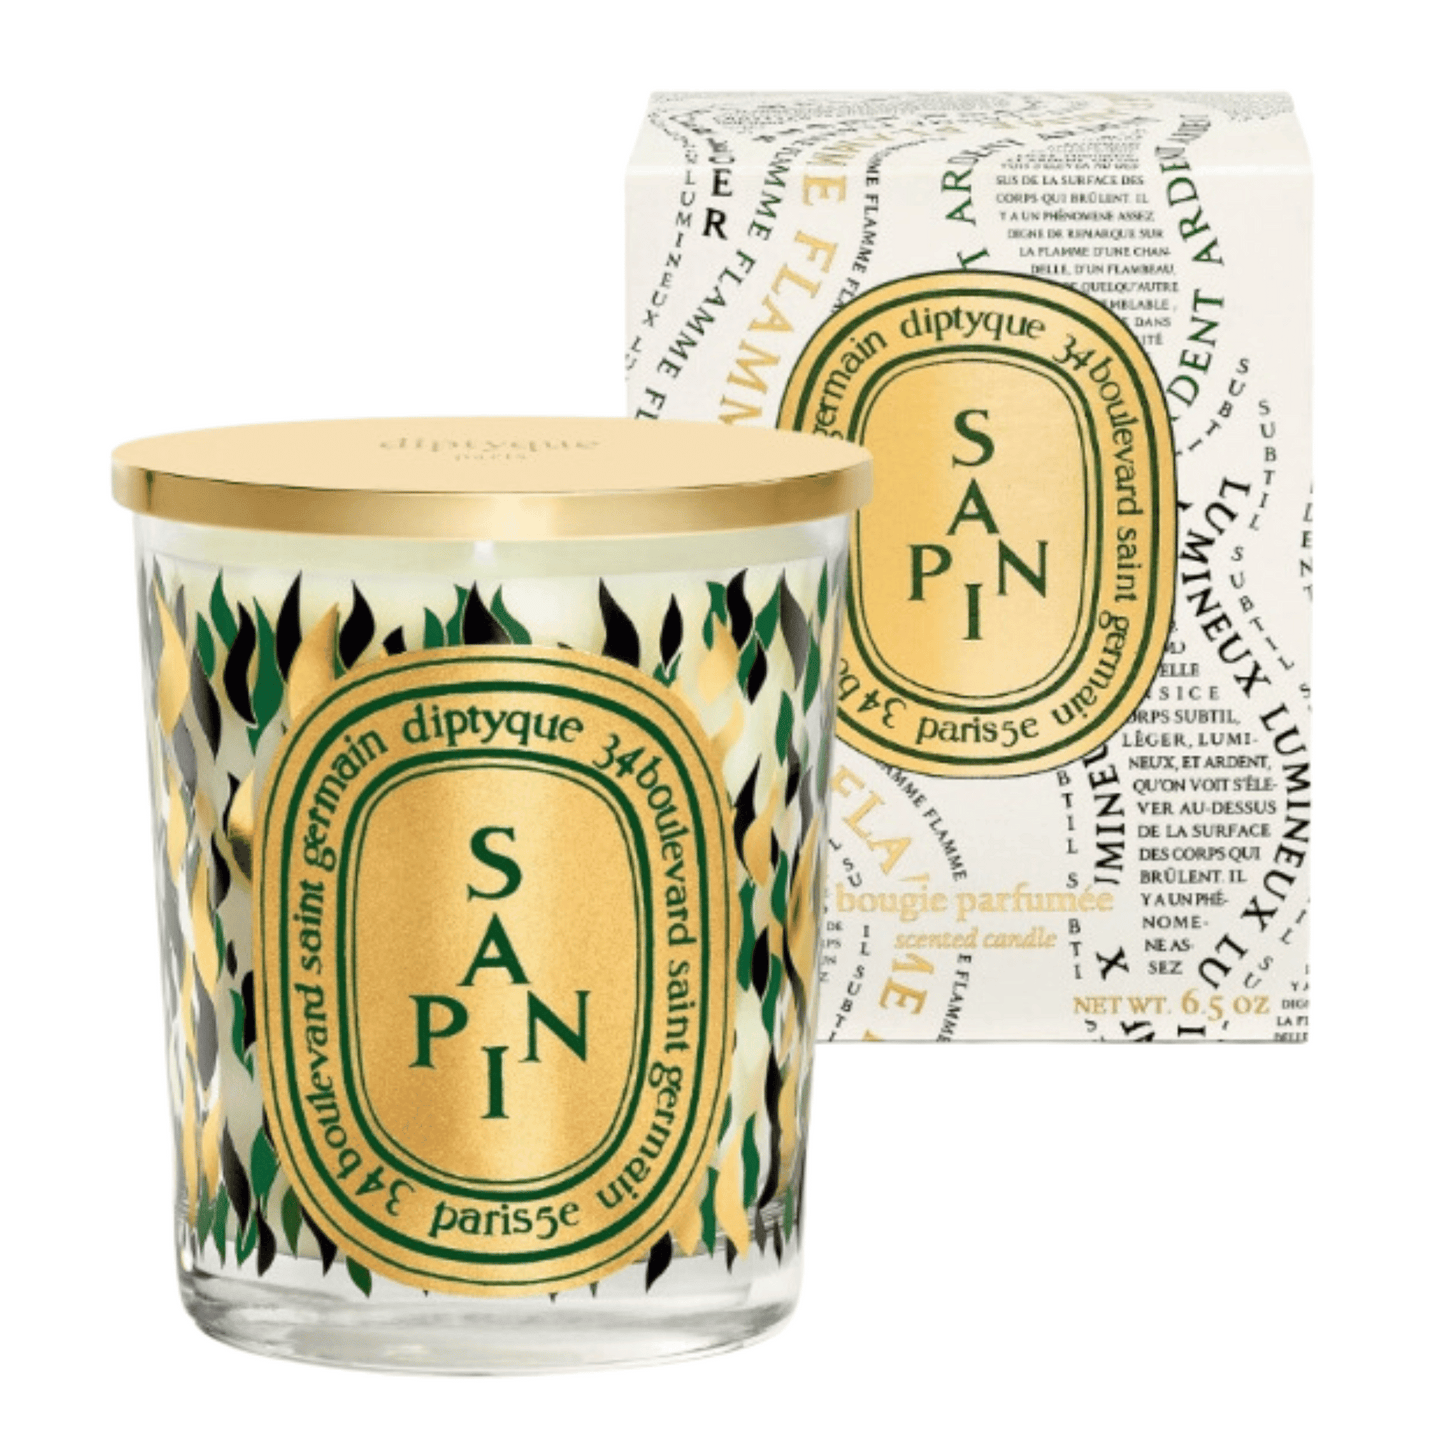 Primary Image of Holiday Pine Tree (Sapin) Candle with Lid